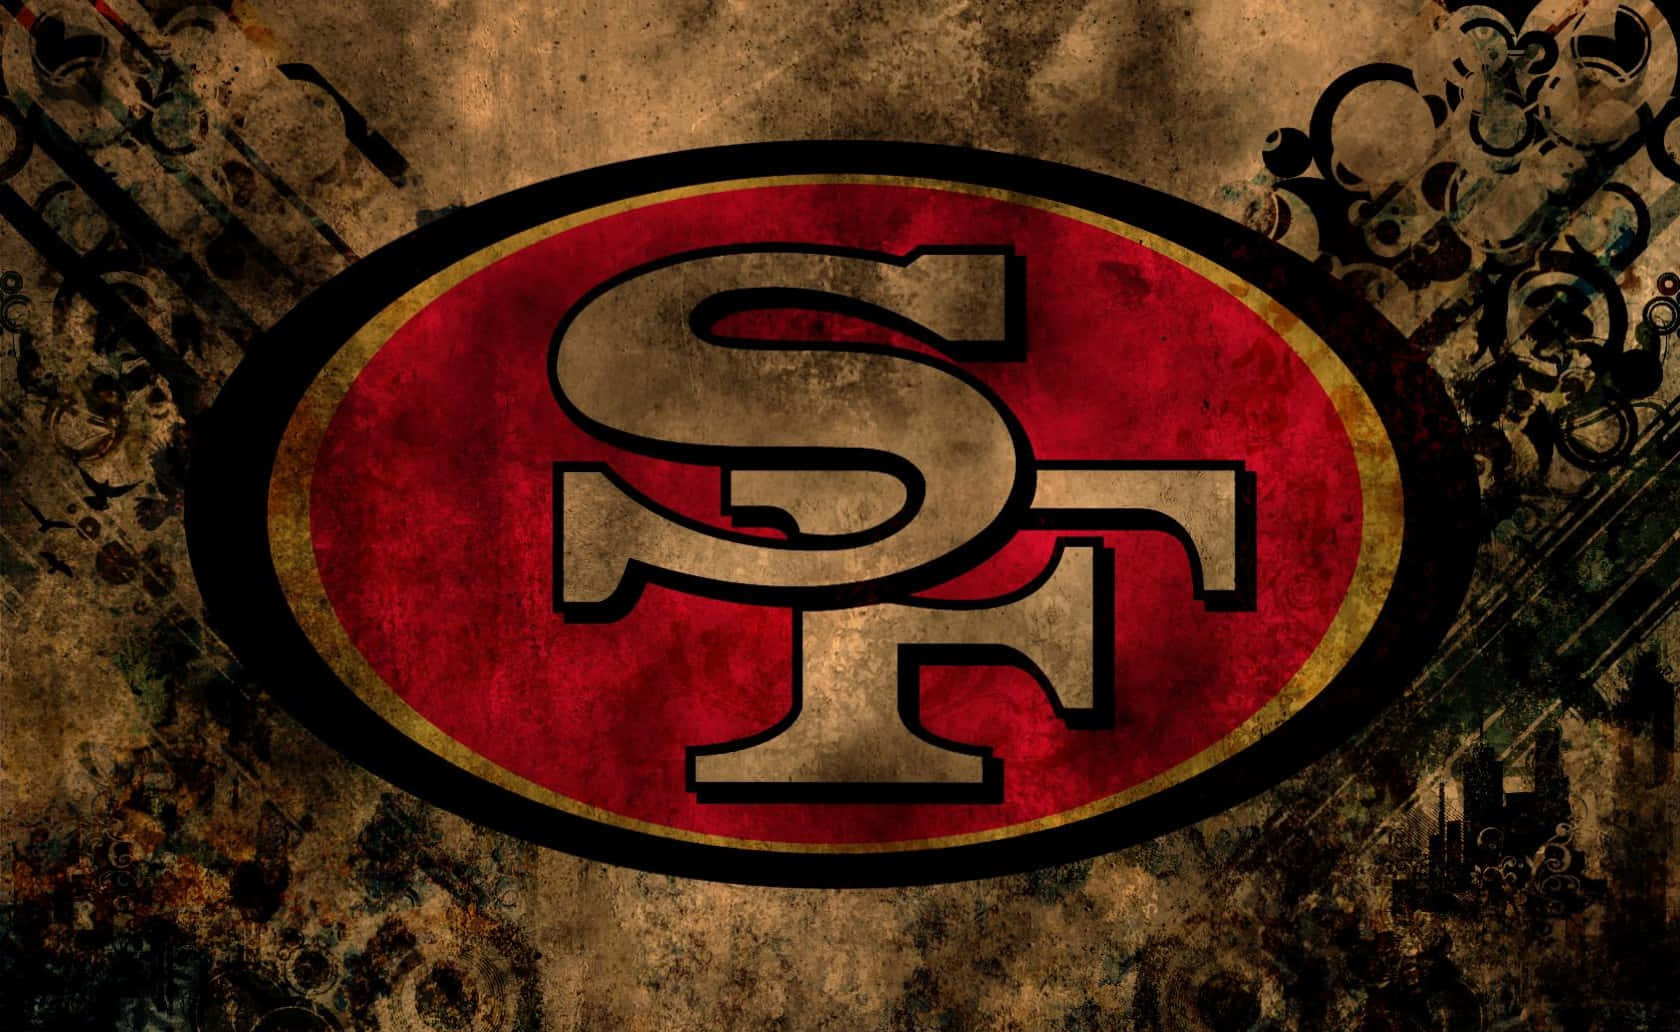 logo of the 49ers